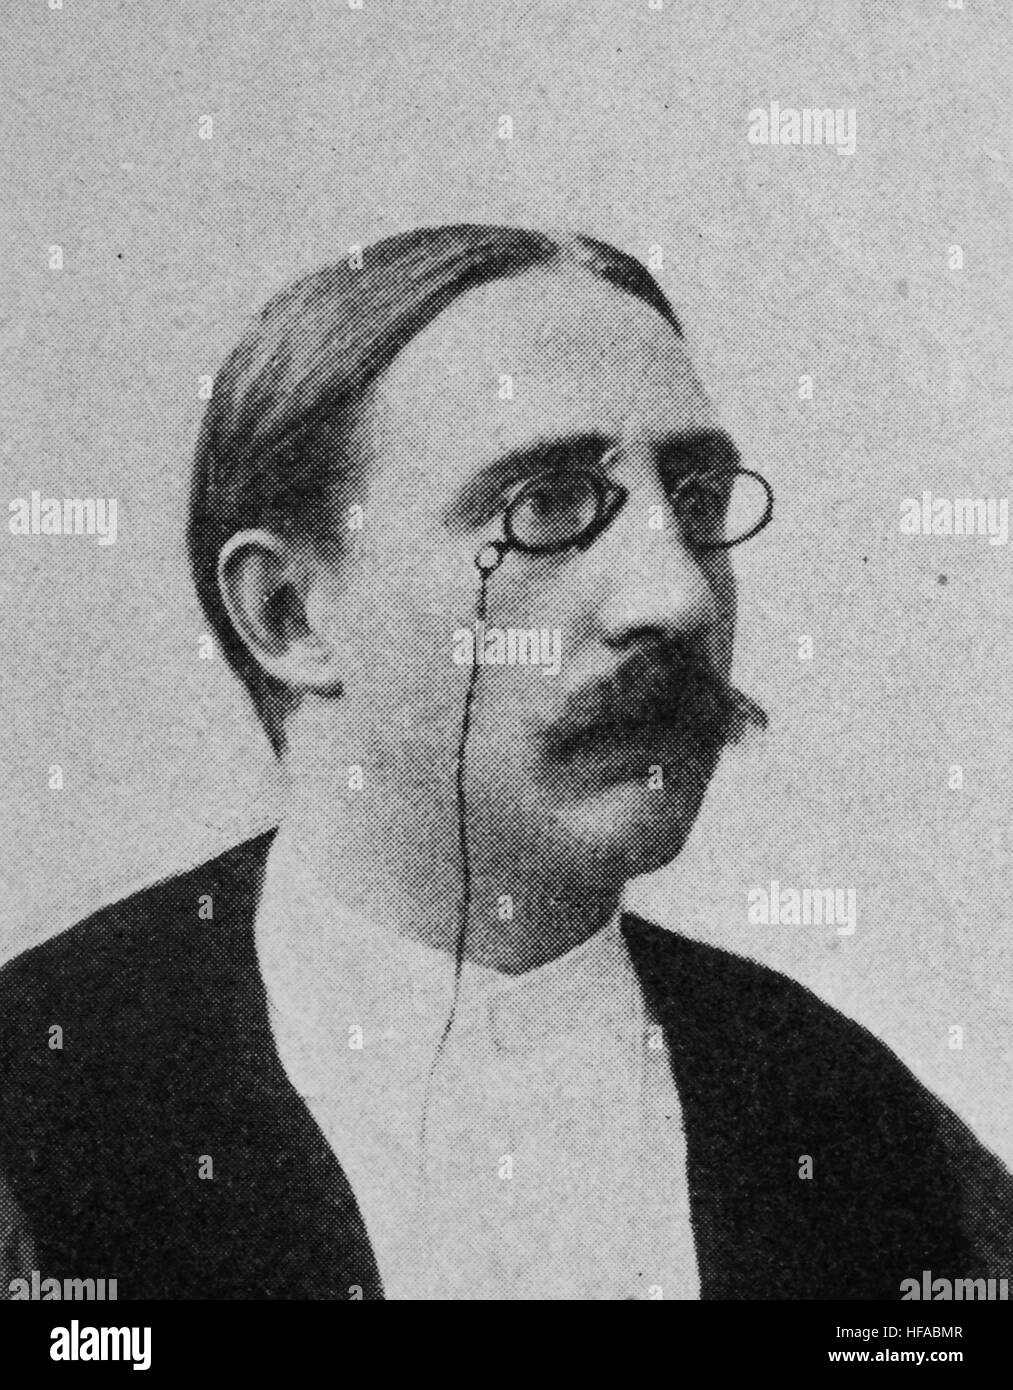 Georg von Schanz, 1853-1931, German legal scholar. He originally developed a definition of income, now known as Haig-Simons income, reproduction photo from the year 1895, digital improved Stock Photo